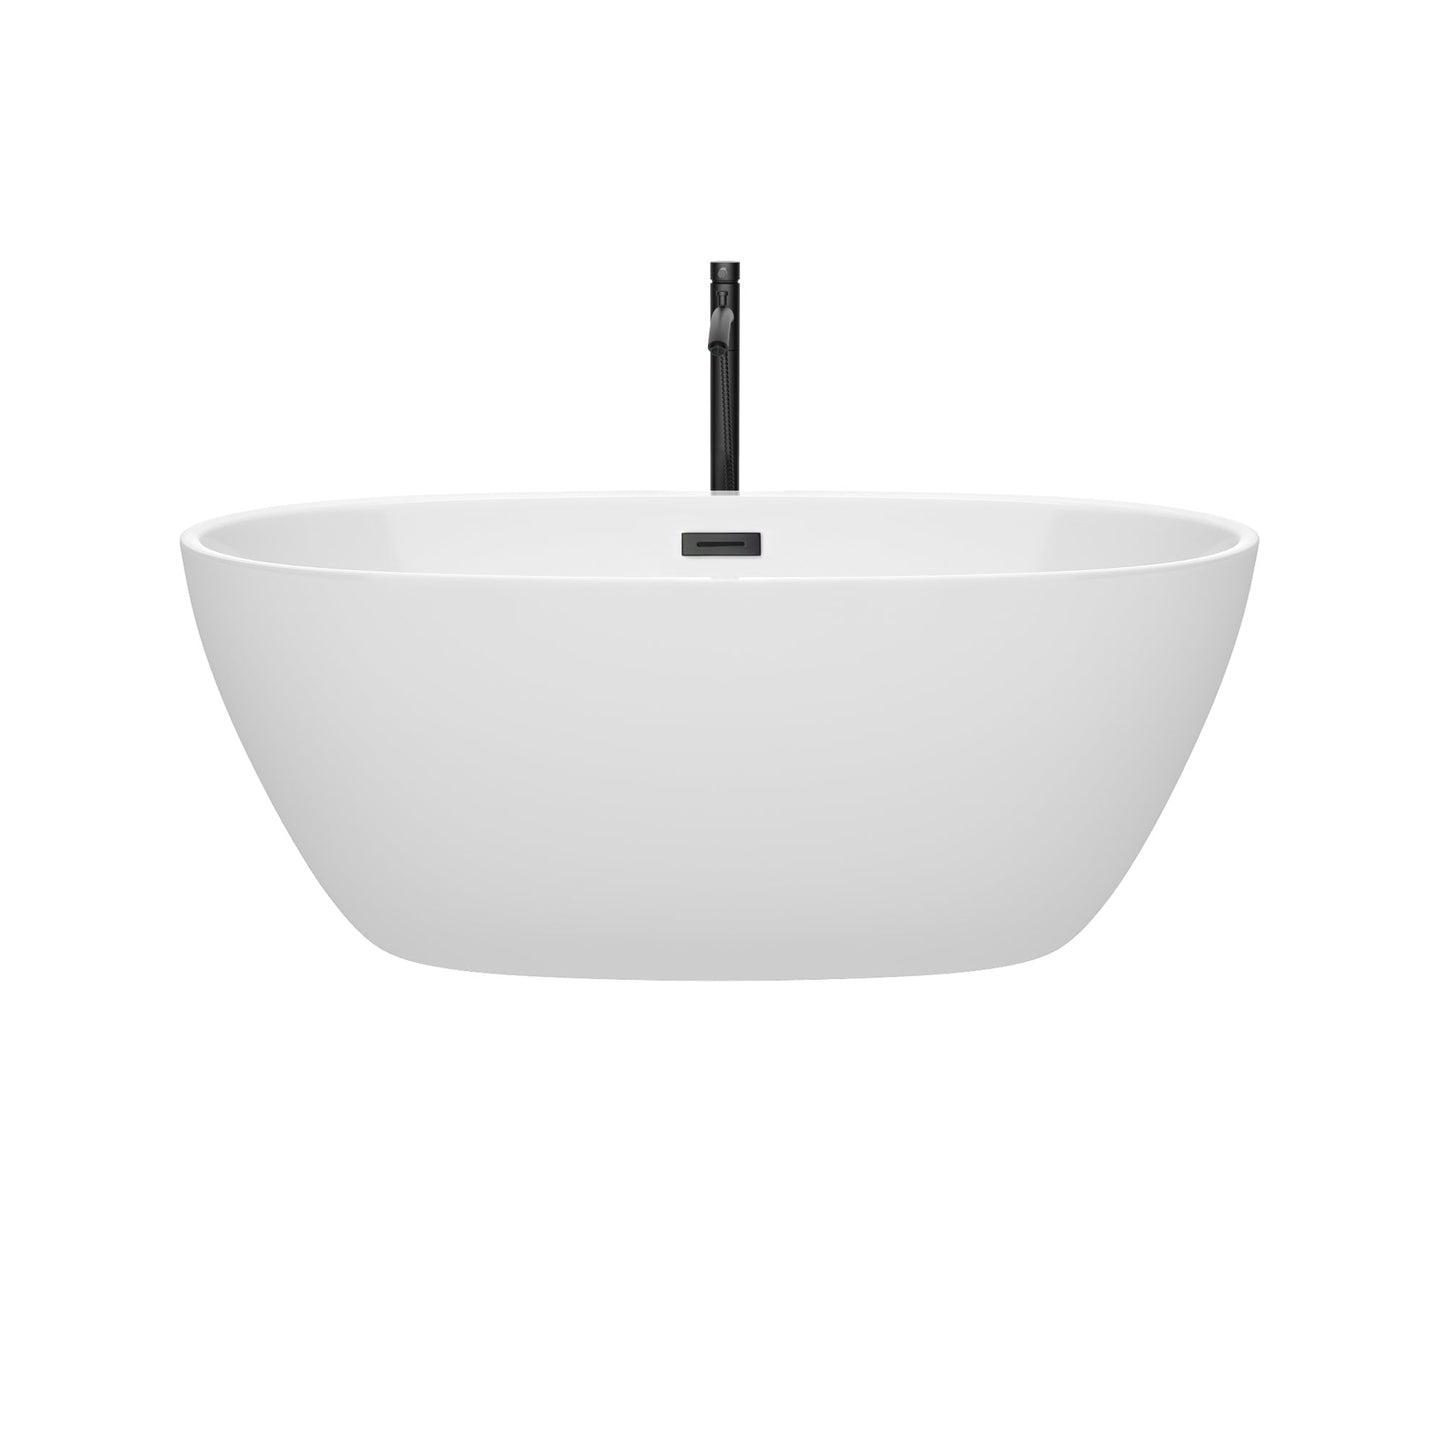 Wyndham Collection Juno 59" Freestanding Bathtub in White With Floor Mounted Faucet, Drain and Overflow Trim in Matte Black